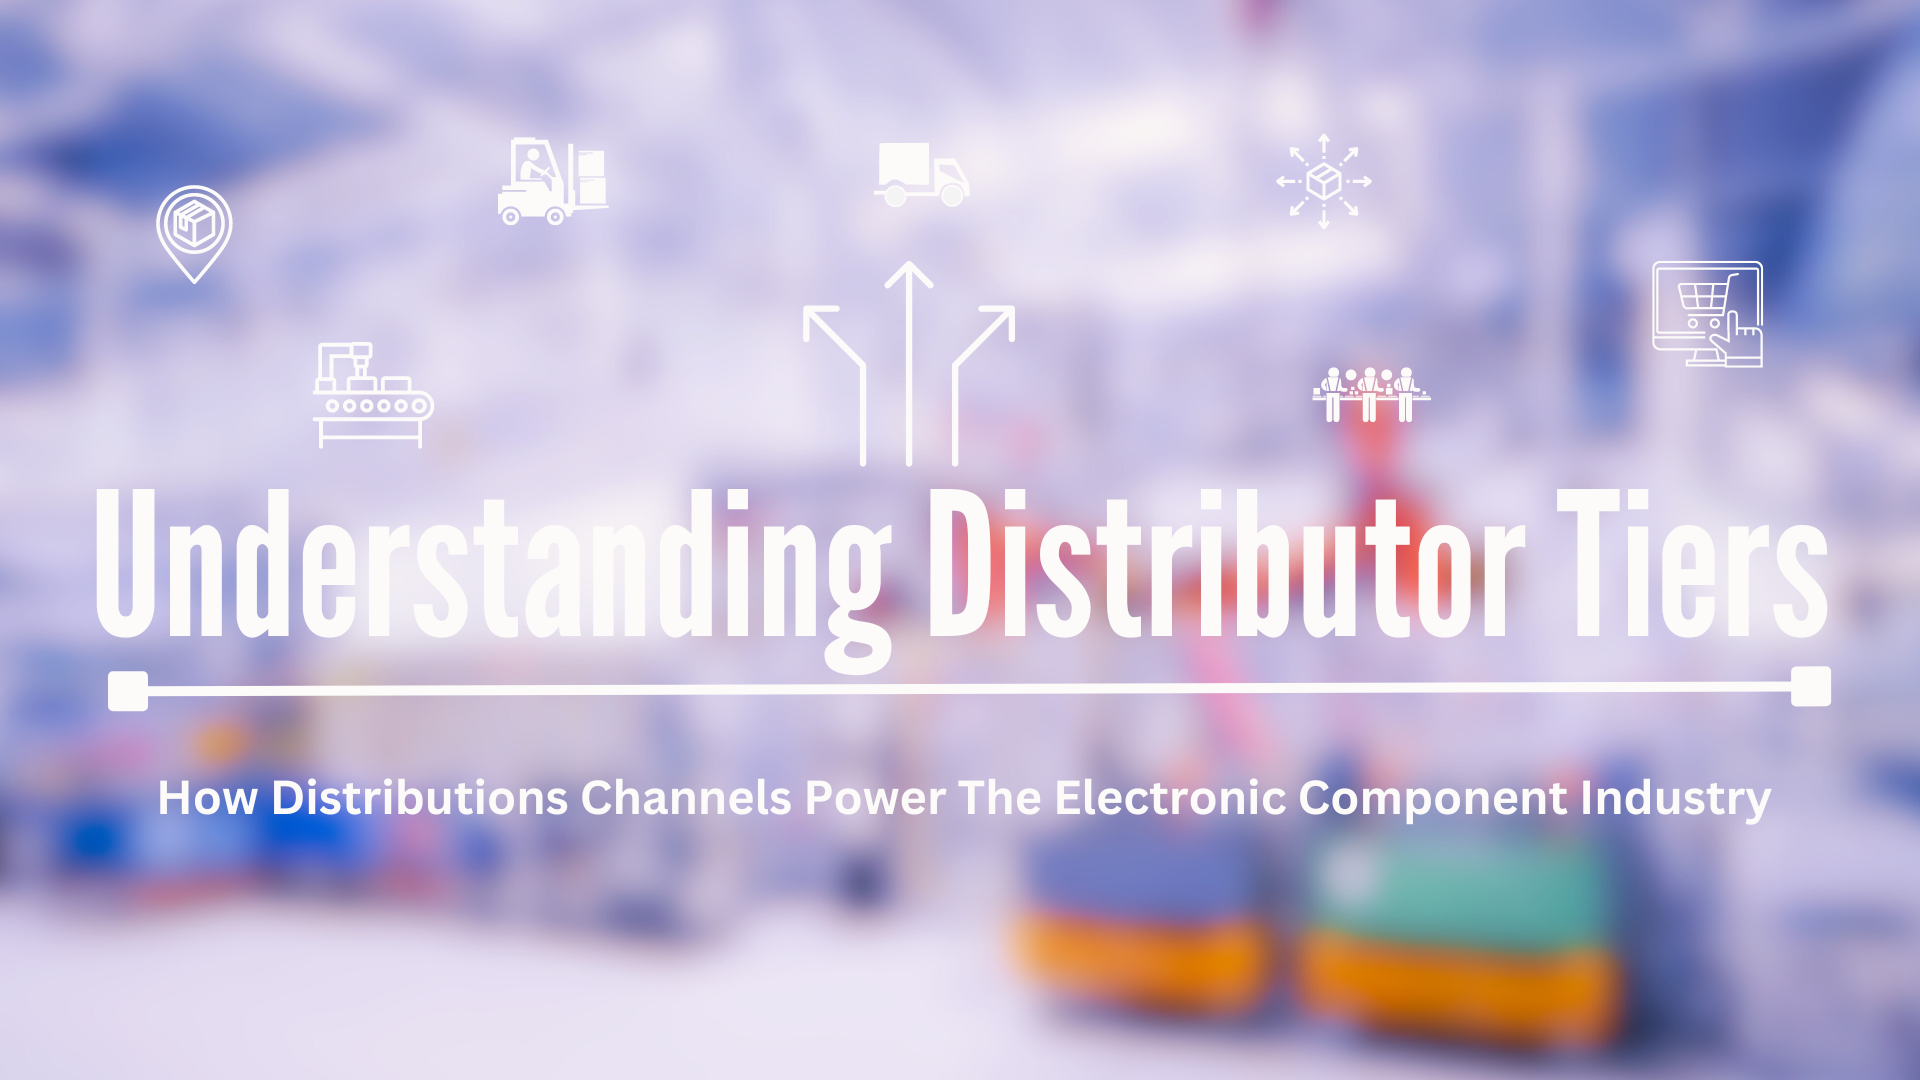 understanding-distributor-tiers-how-distribution-channels-power-the-electronic-component-industry